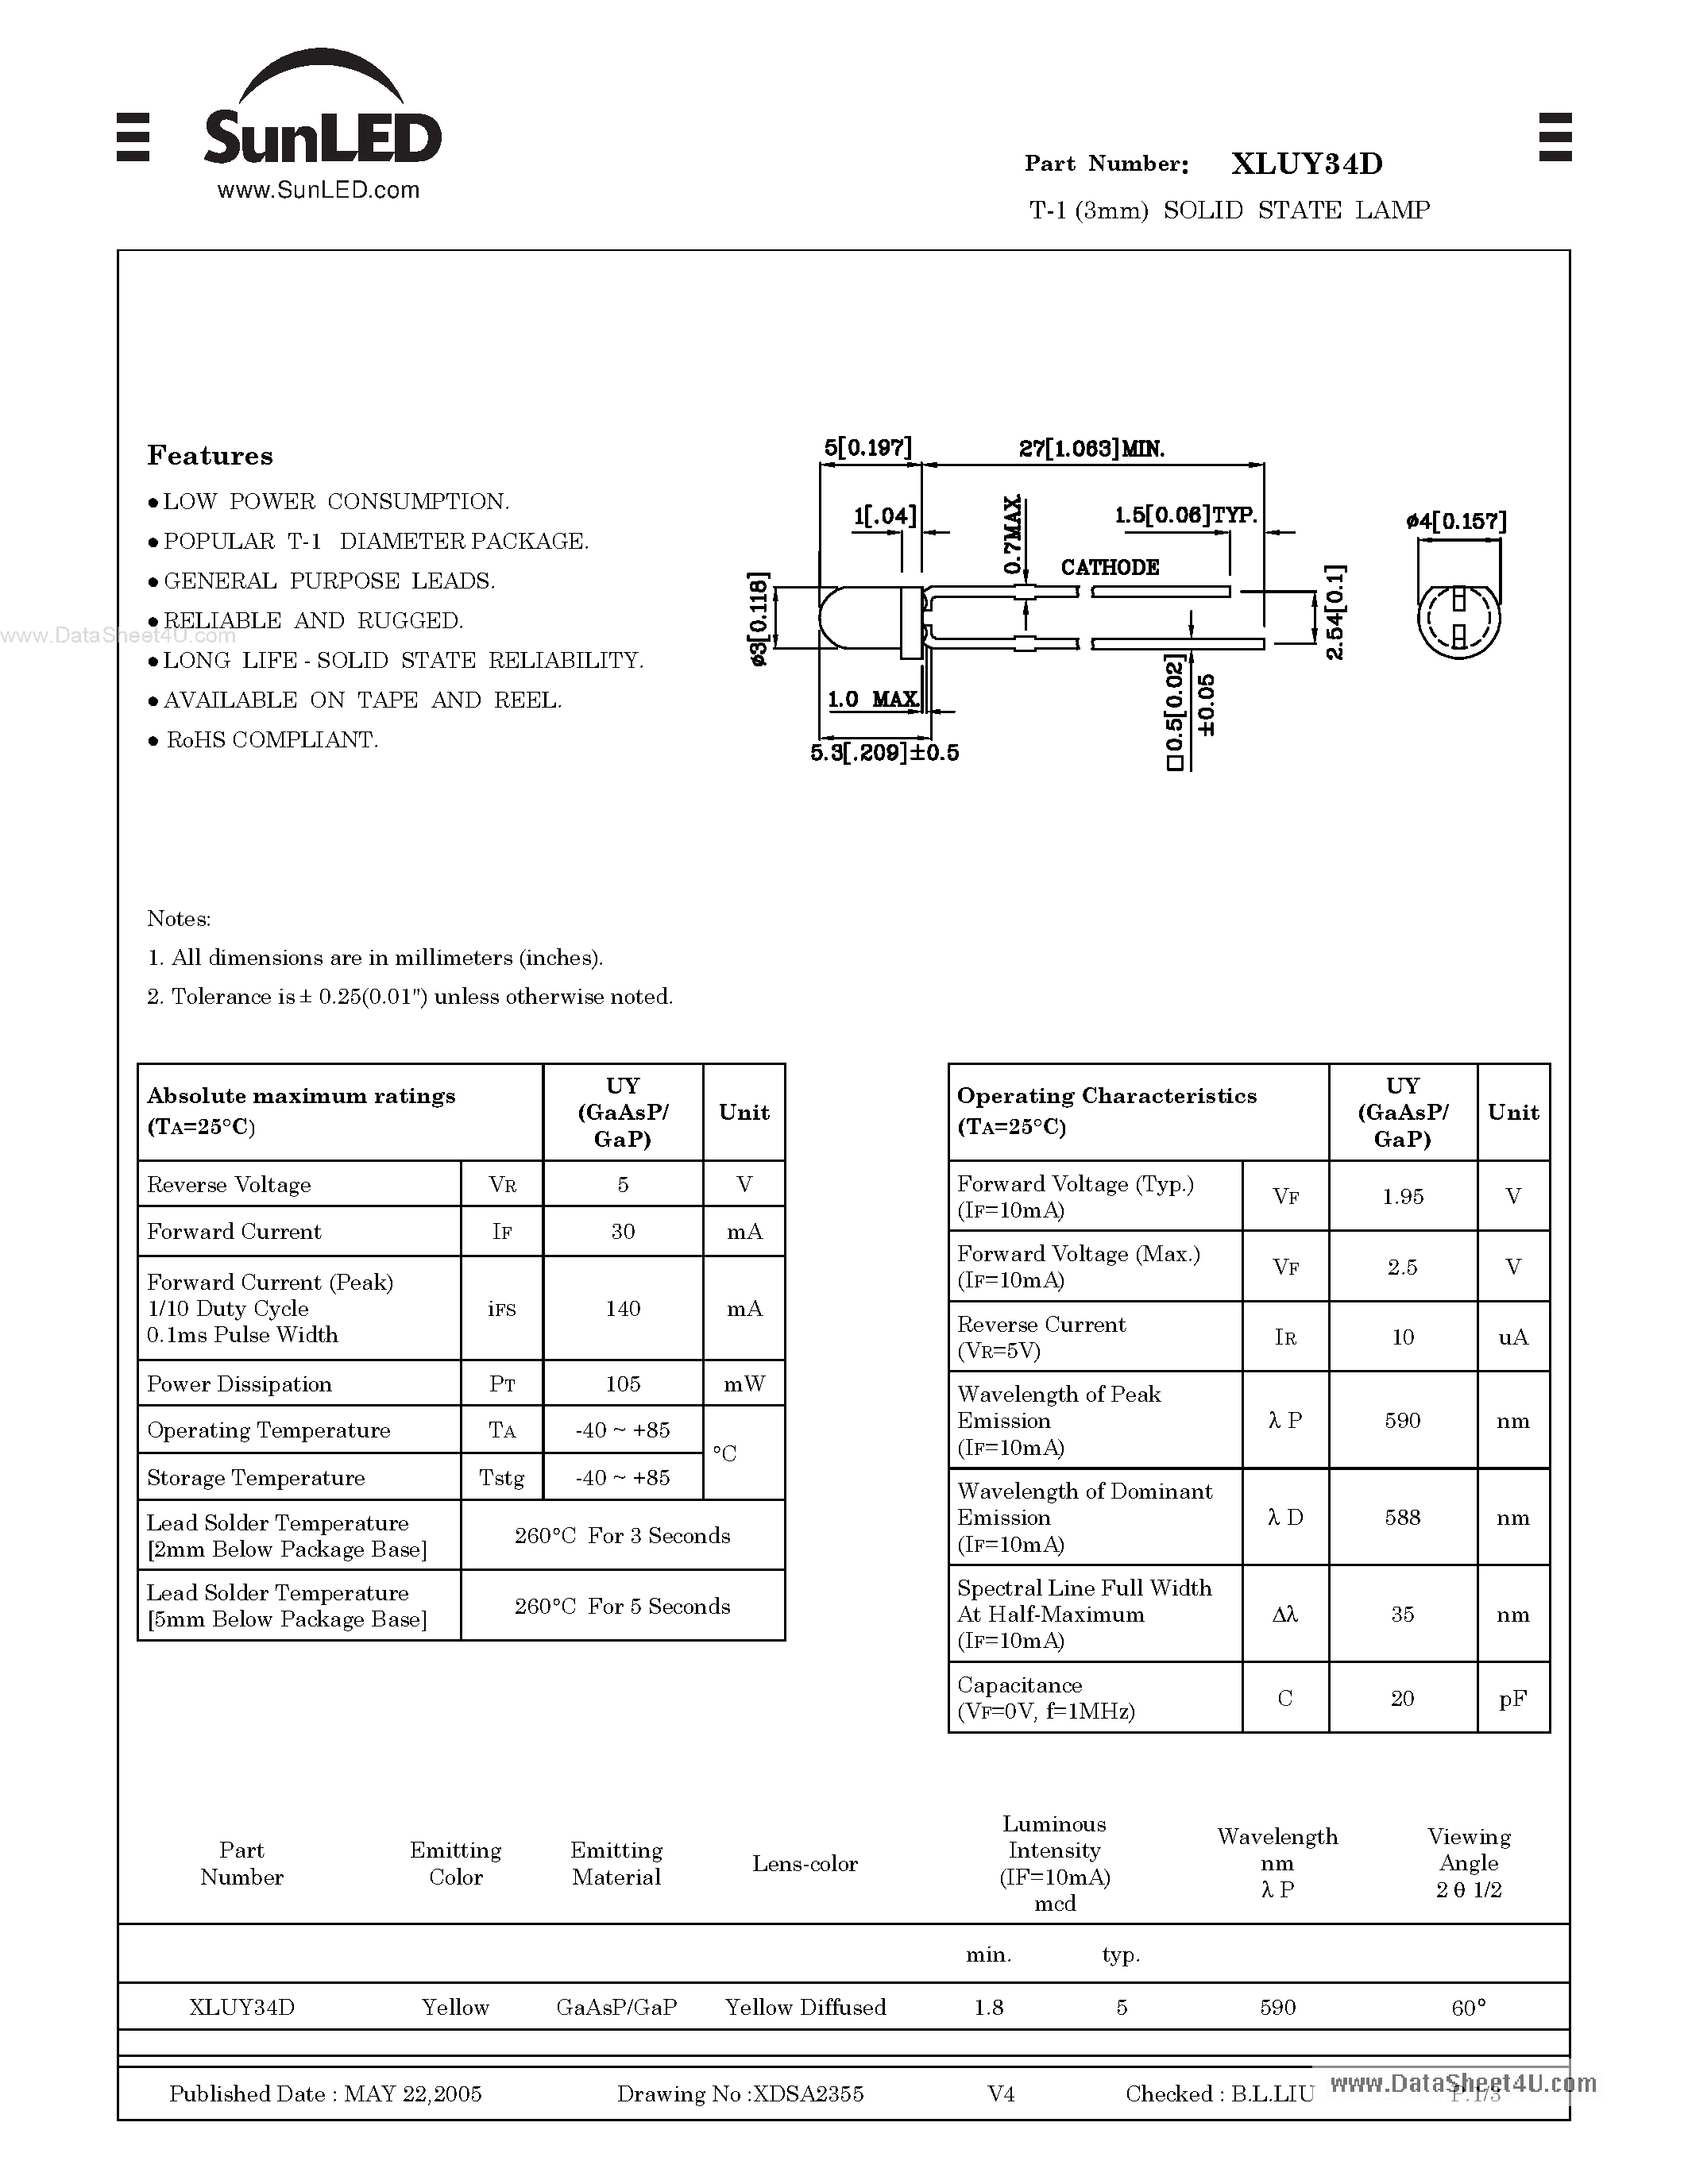 Datasheet XLUY34D - T-1 (3mm) SOLID STATE LAMP page 1